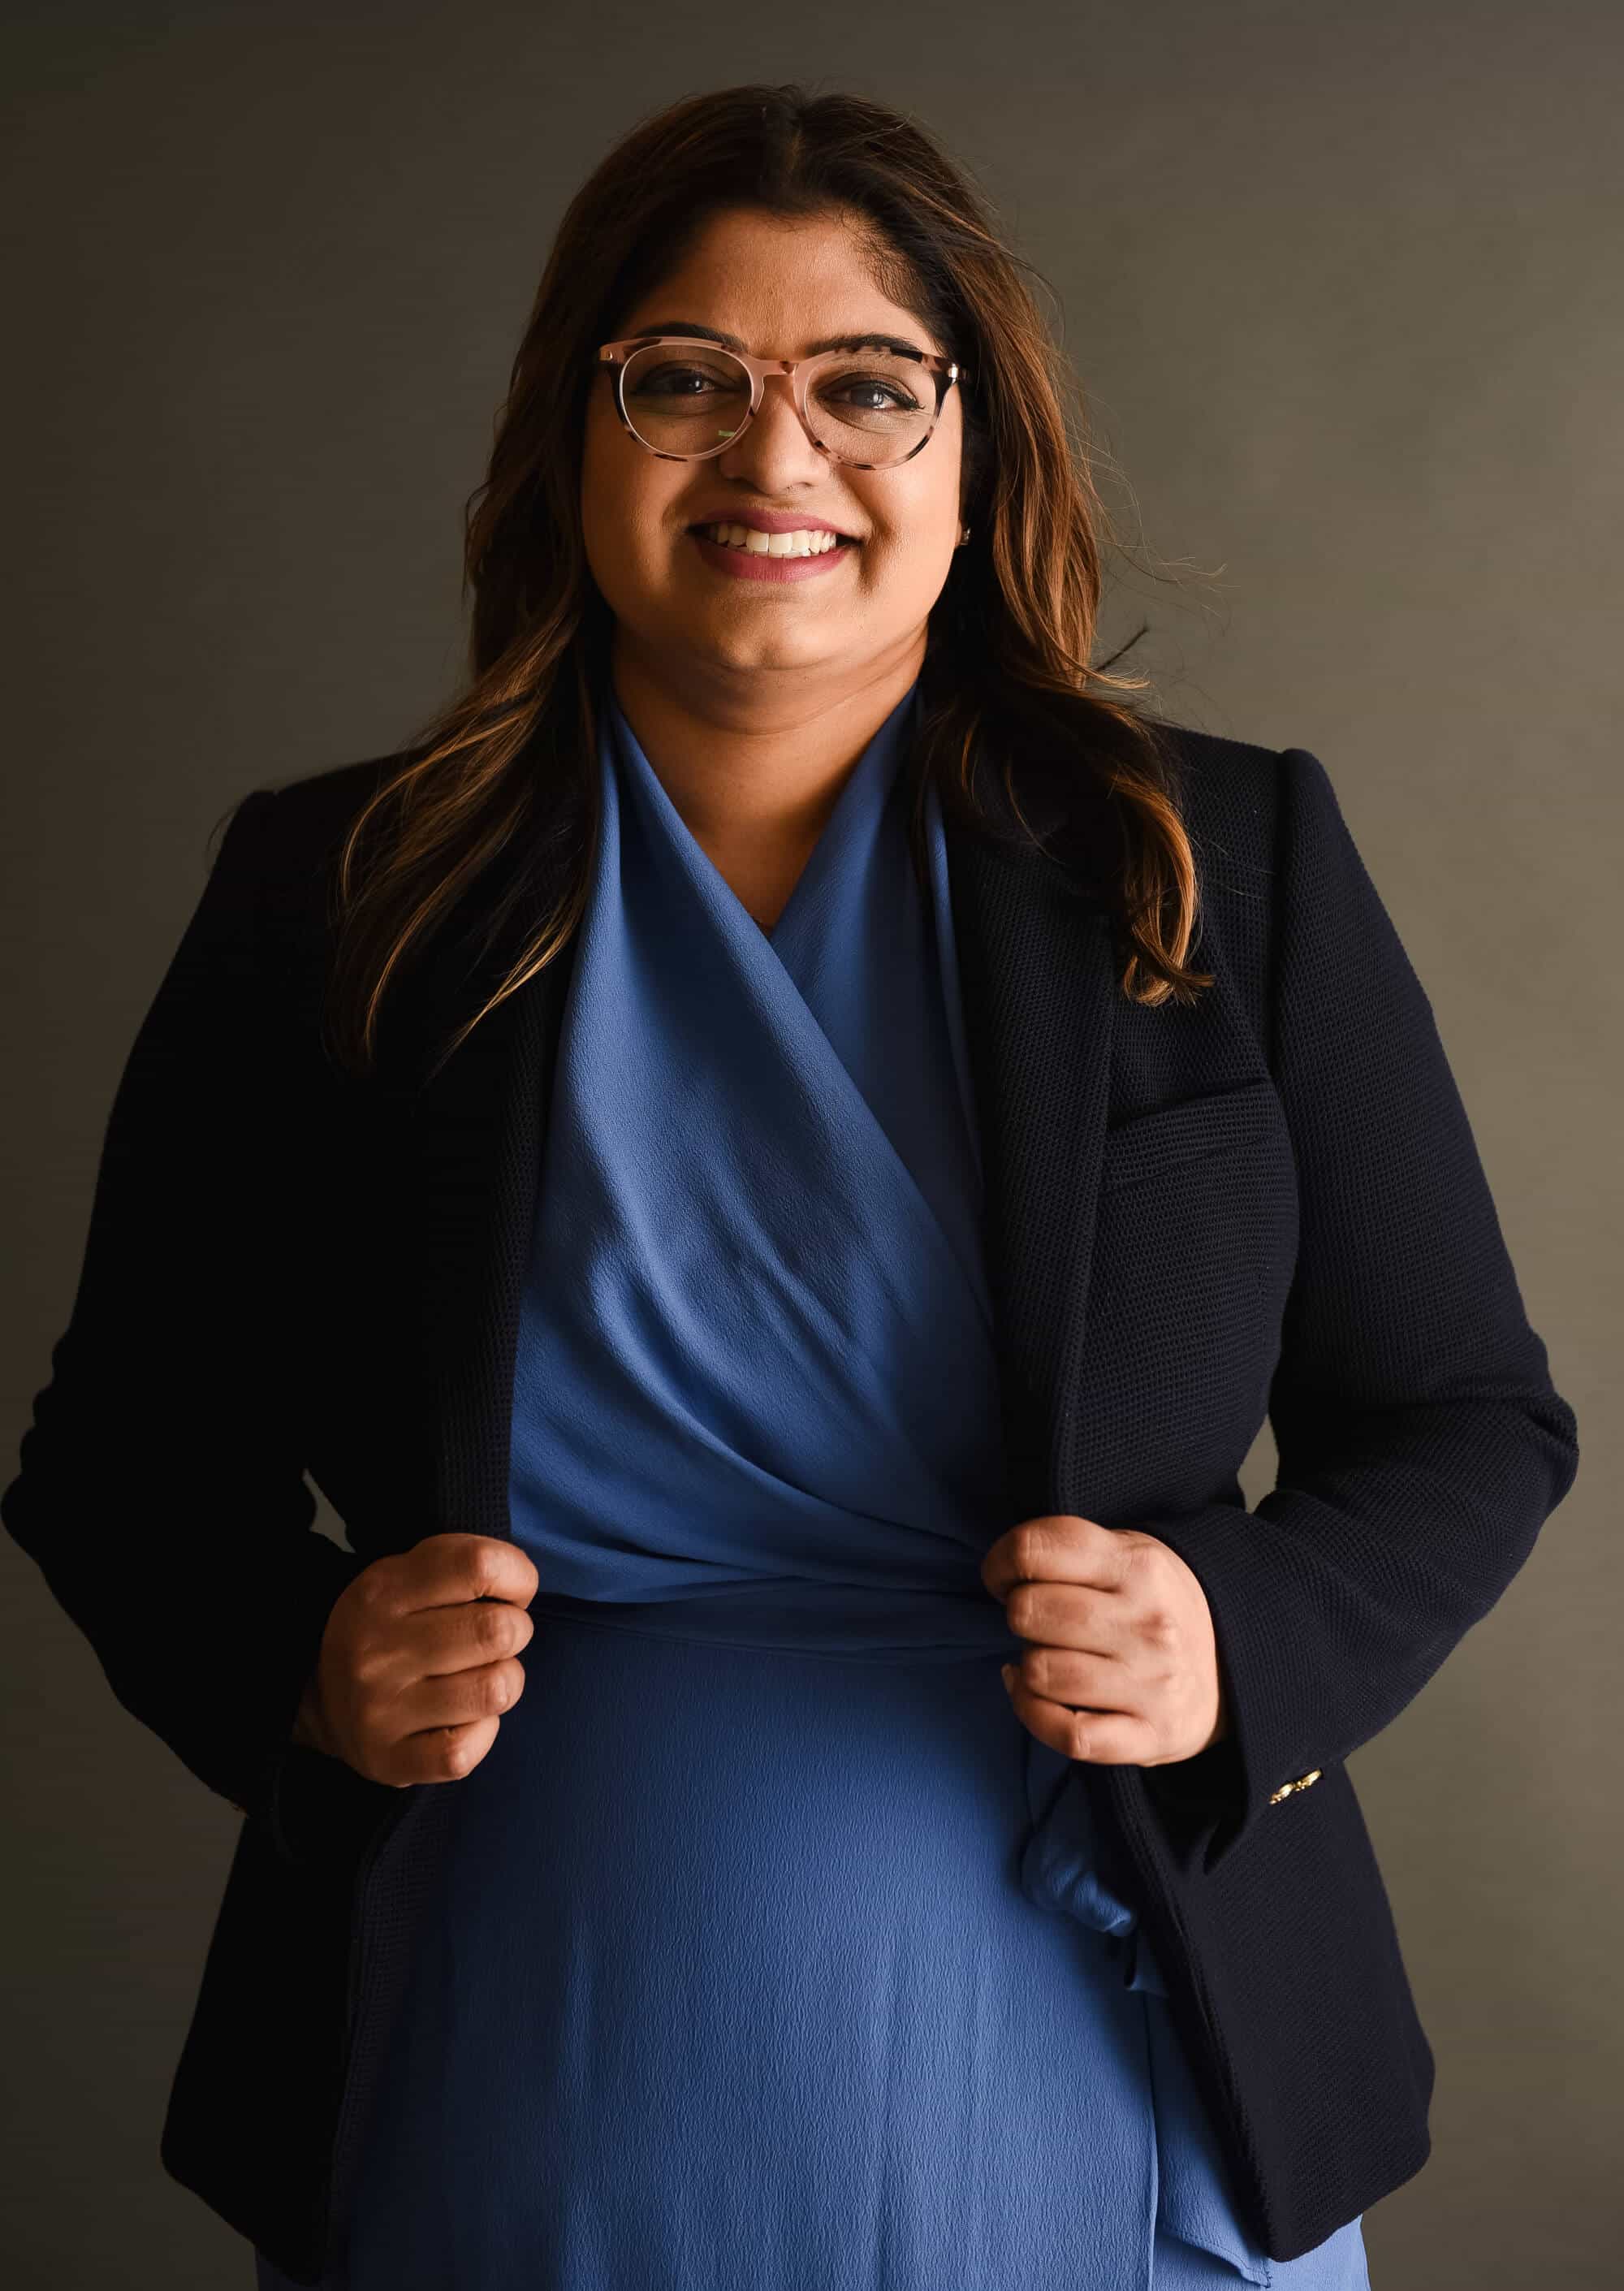 a profession woman poses wearing a blue dress and black blazer<br />
